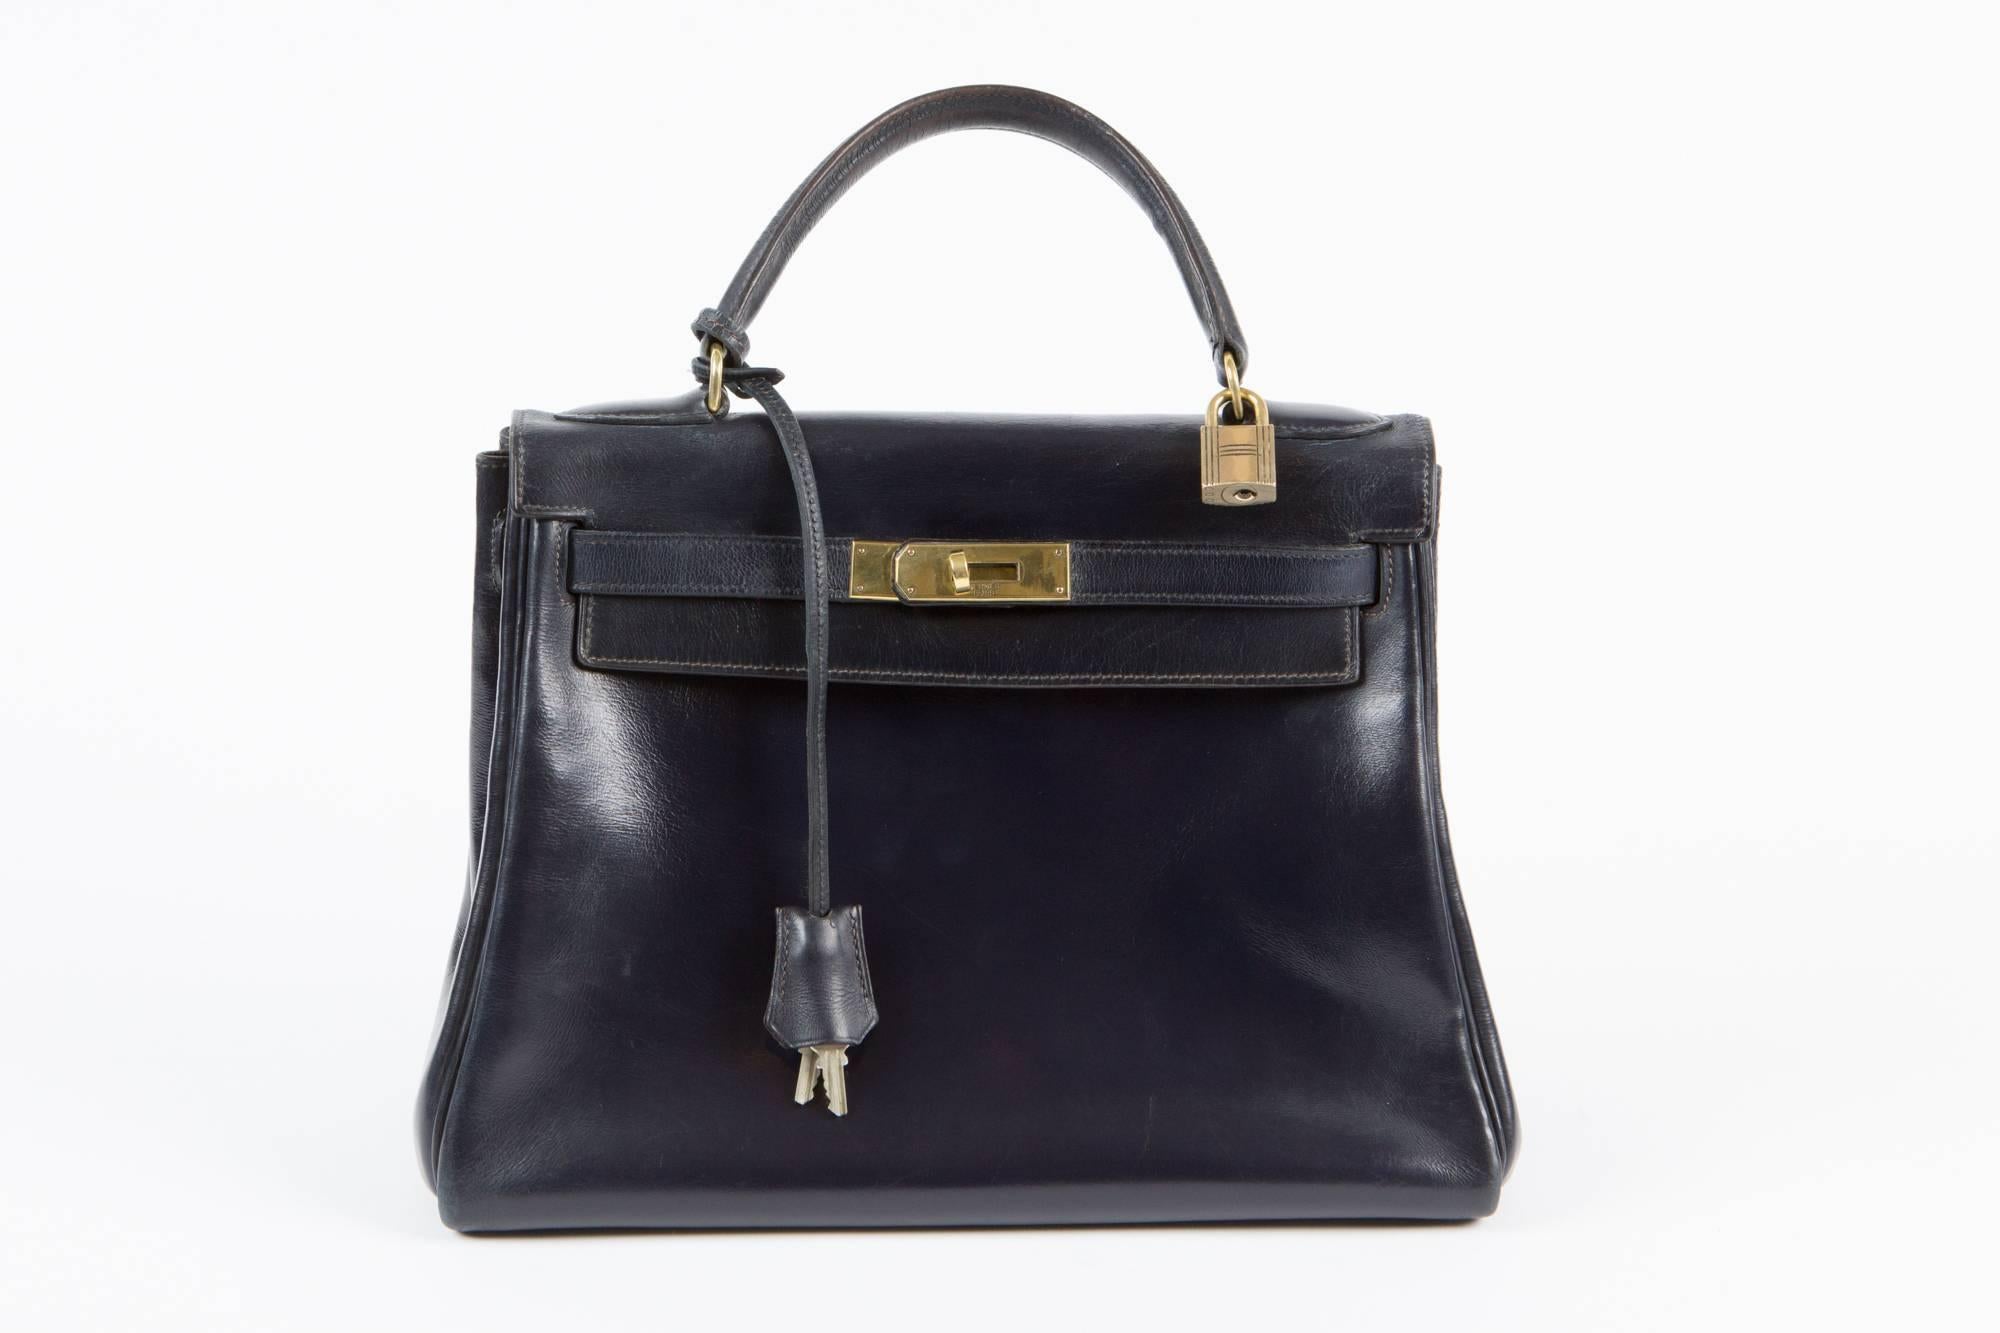 Fabulous 1965-70, Hermes Vintage navy Kelly bag in 28cm, this classic bag features gold- plated hardware and comes with it's original clochette, lock and  2 keys.
Exceptional, rare and collectable Kelly of the 60s. 
Marked Hermès Paris, Letter RZ